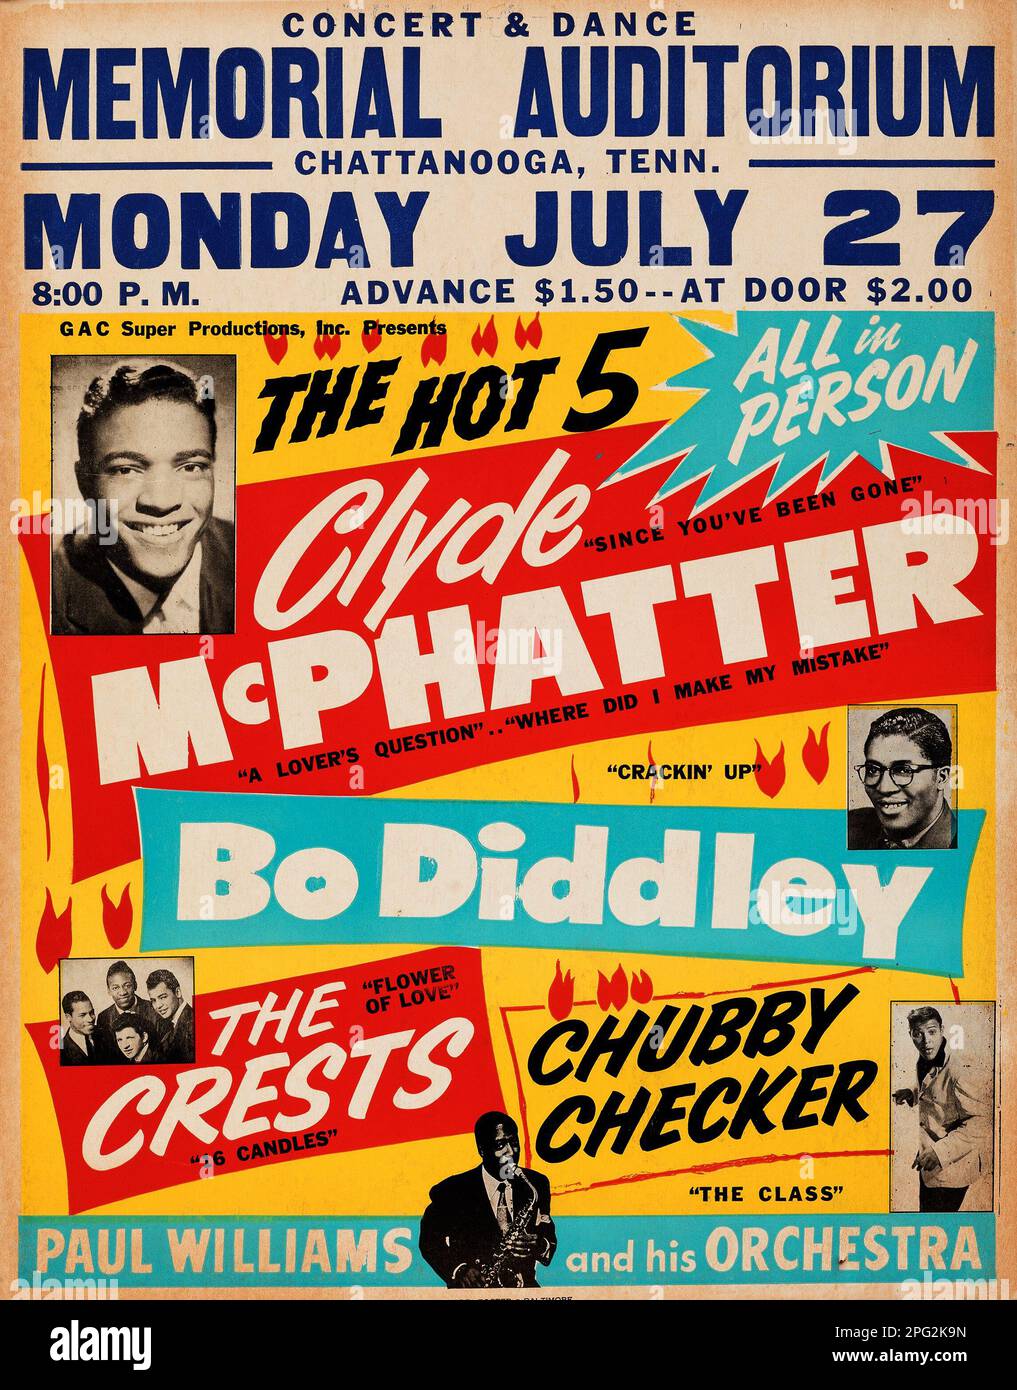 Bo Diddley, Clyde McPhatter, Chubby Checker 1959 "Hot 5" Poster Concert Foto Stock